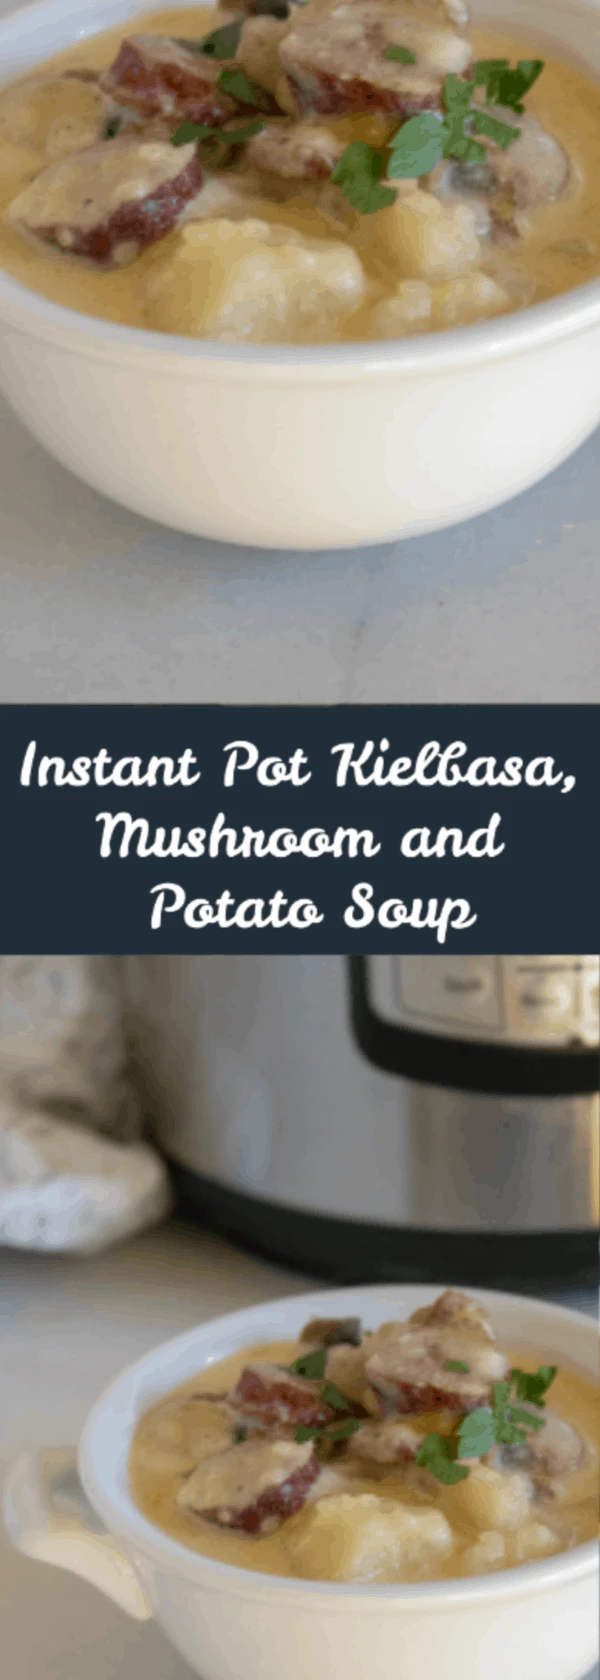 Instant Pot Kielbasa, Mushroom, and Potato Soup is creamy, delicious, and tastes like you have been cooking all day! It’s easy to prepare and is ready in a flash thanks to the Instant Pot.  via @Mooreorlesscook